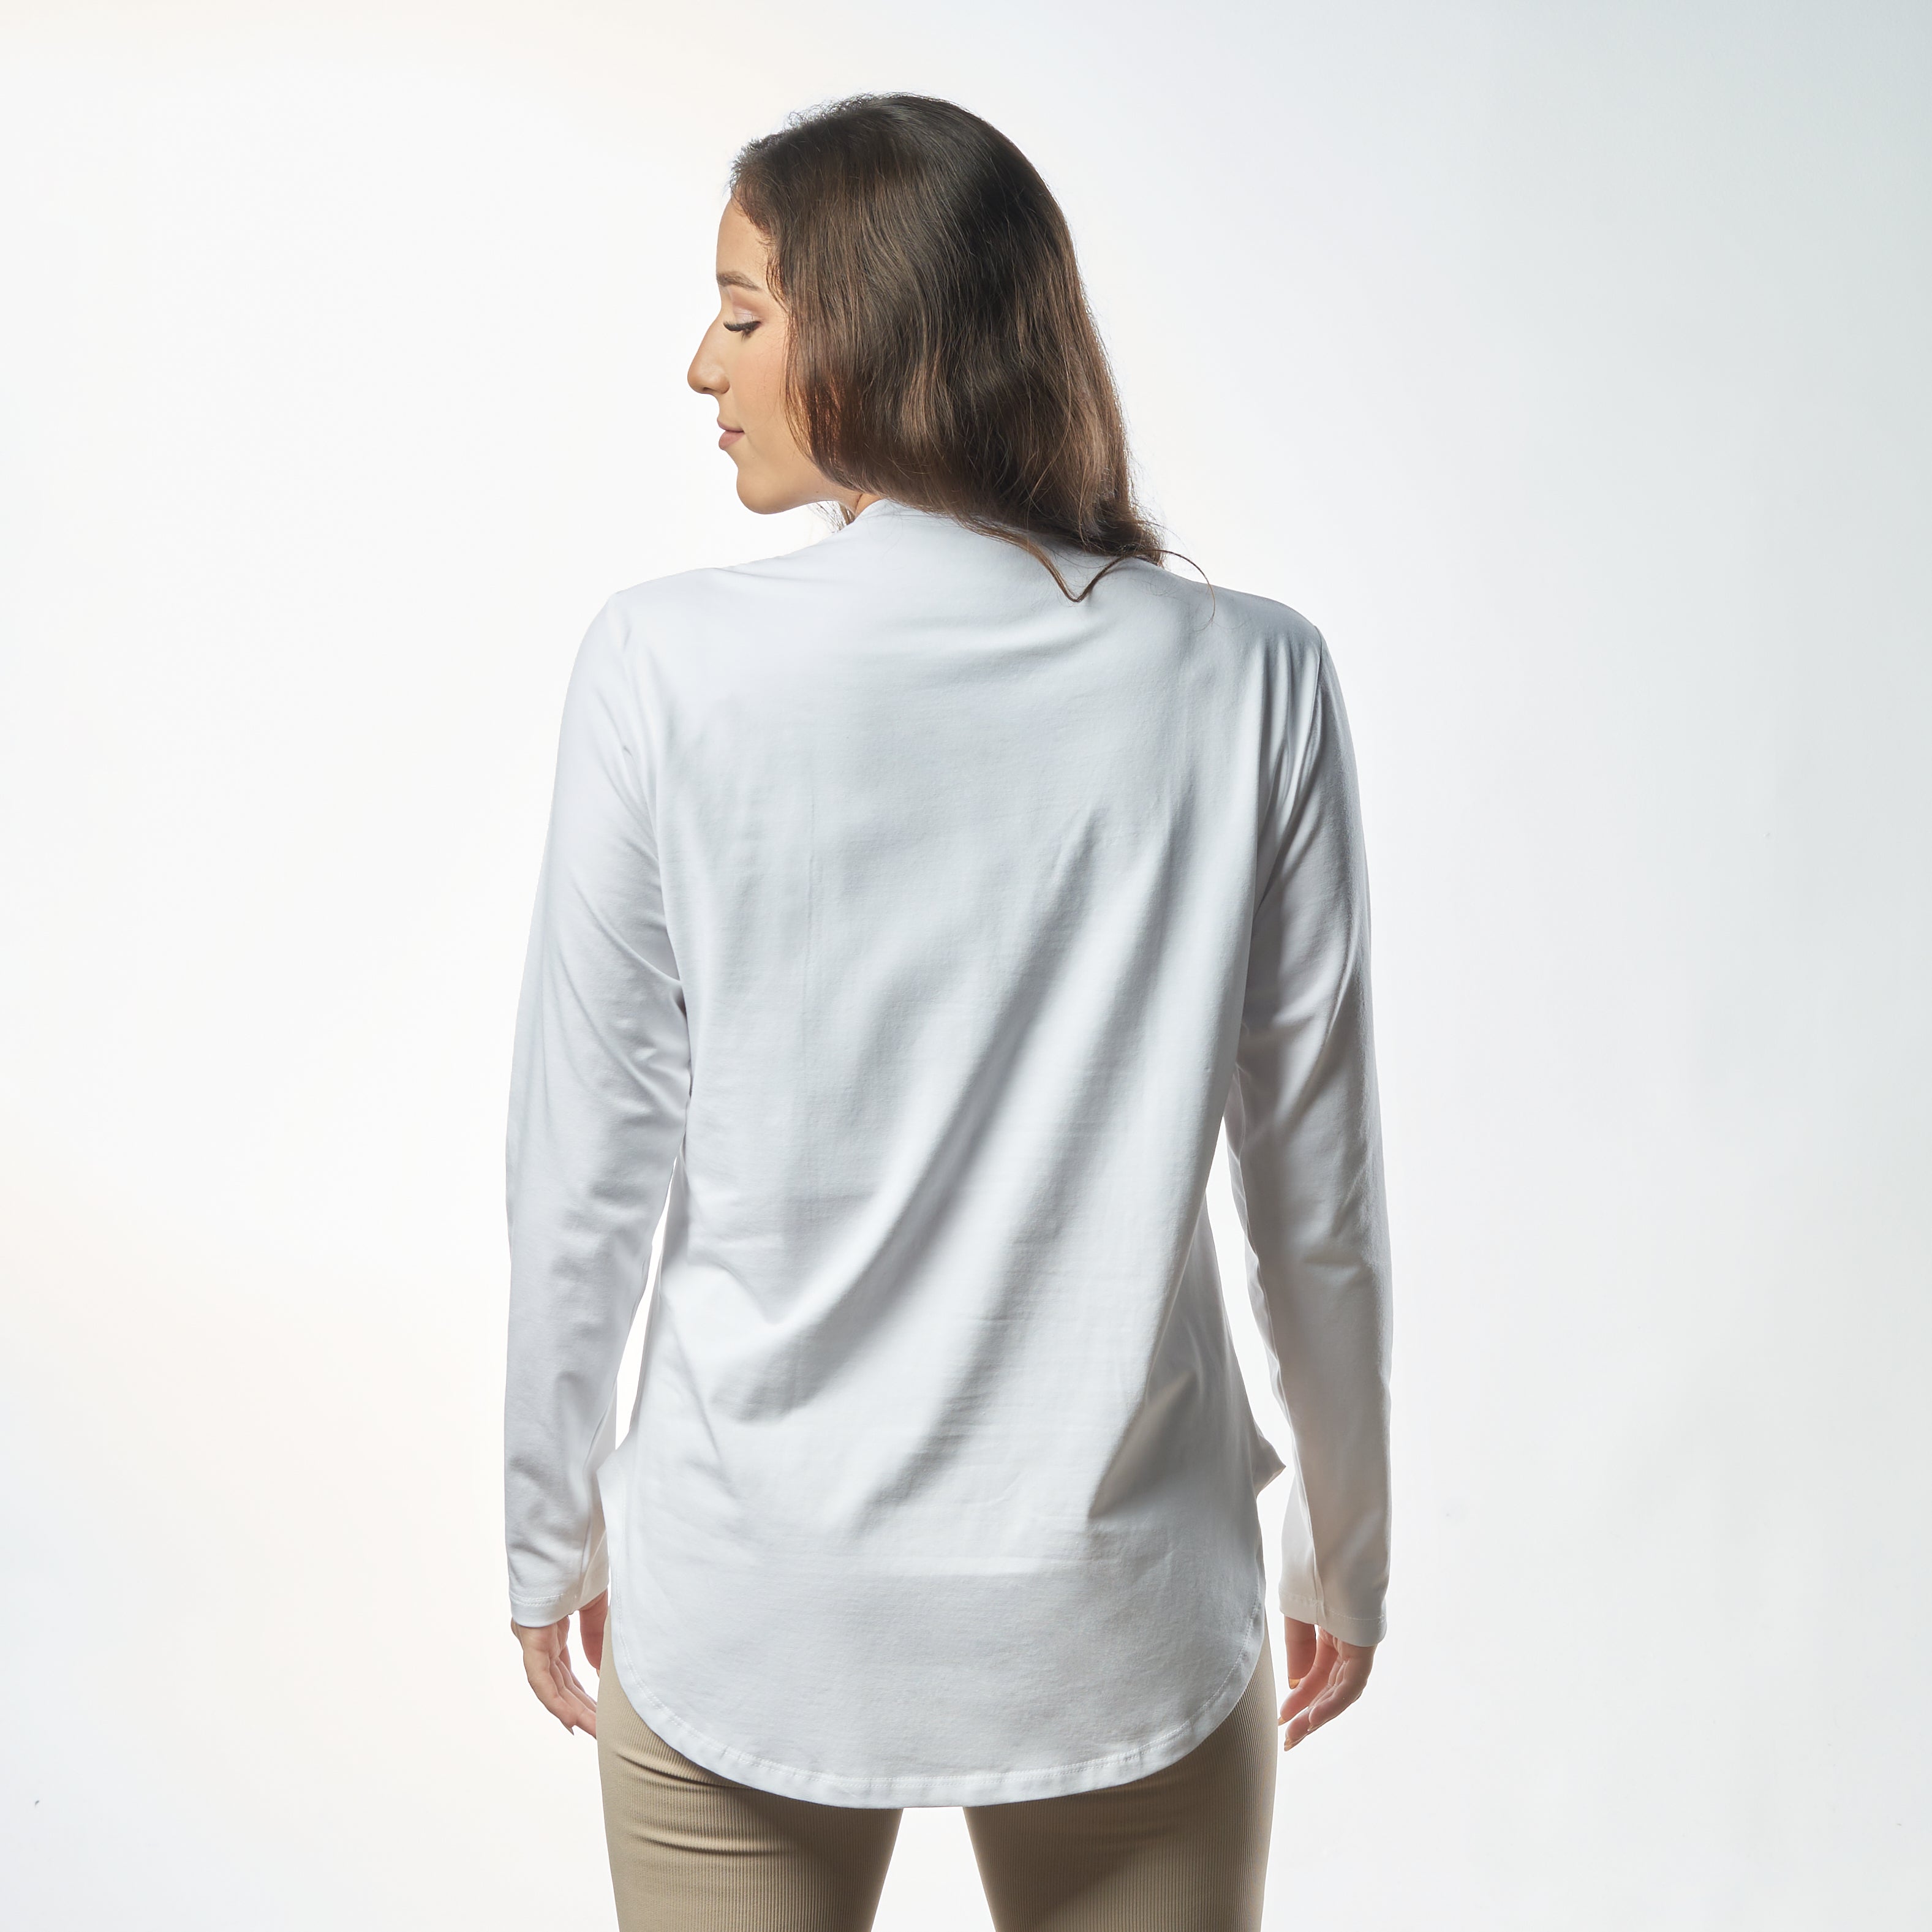 Bamboo + Premium Cotton Double Layer Short Fit Long Sleeves Basic T-Shirt